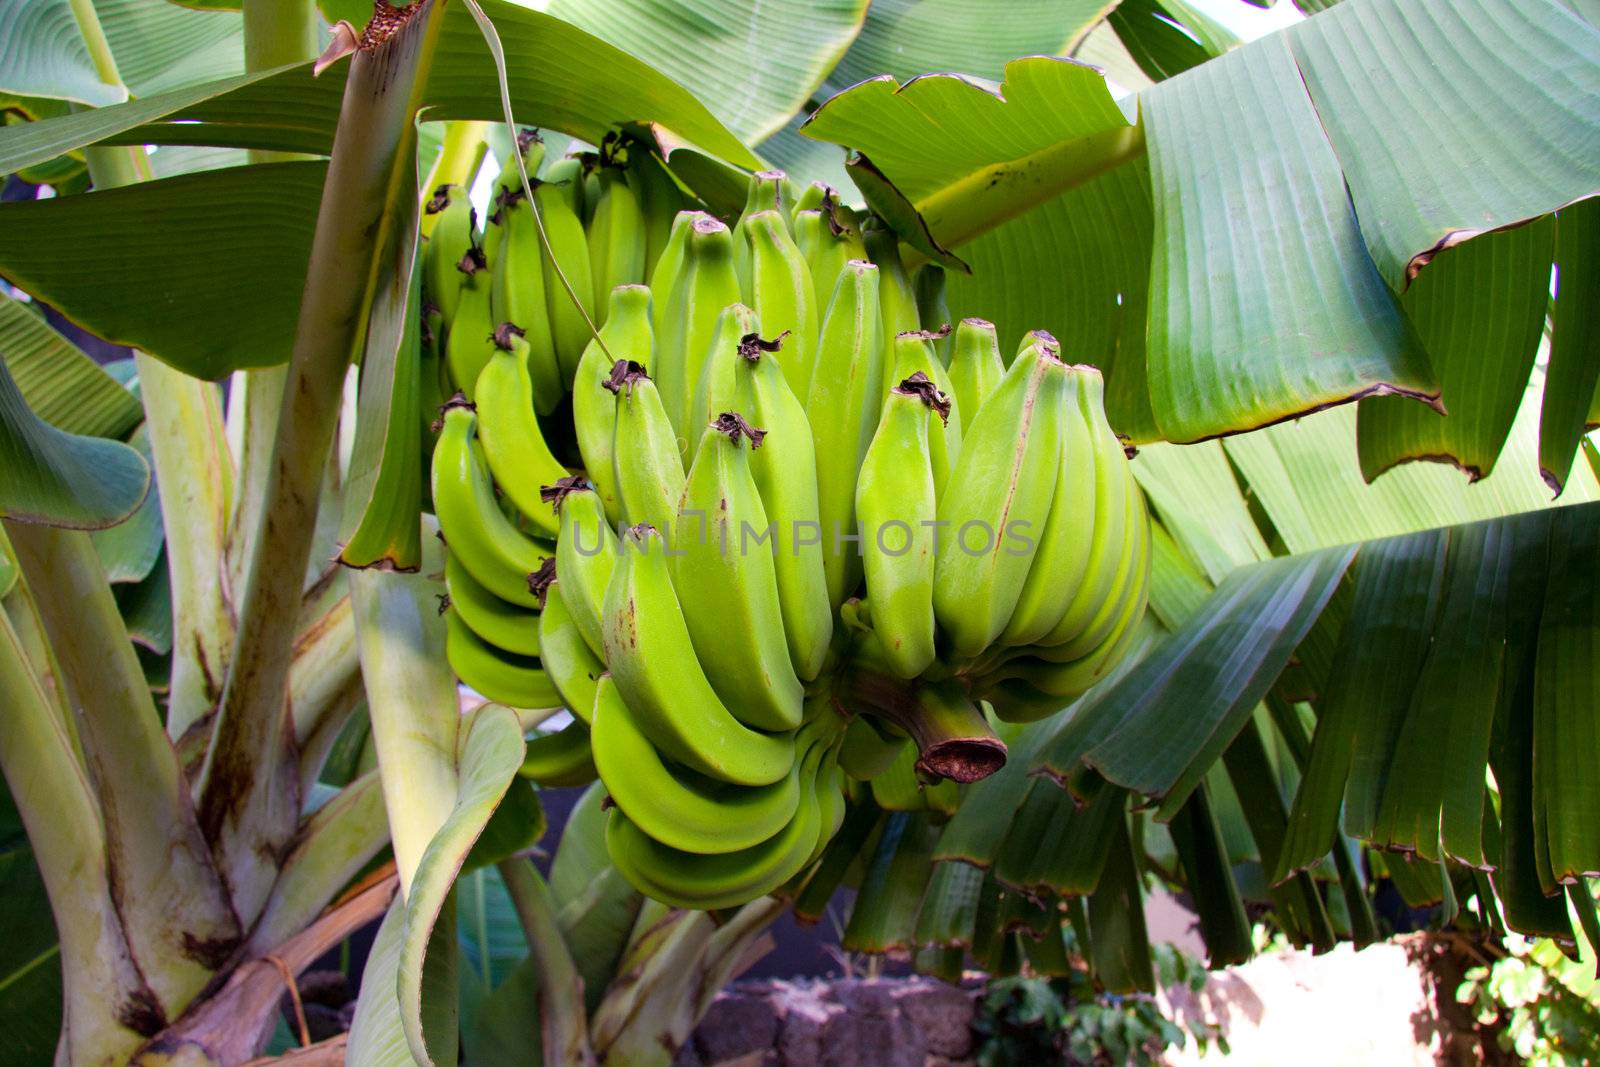 Bananas hang on a palm in hawaii almost ripe.